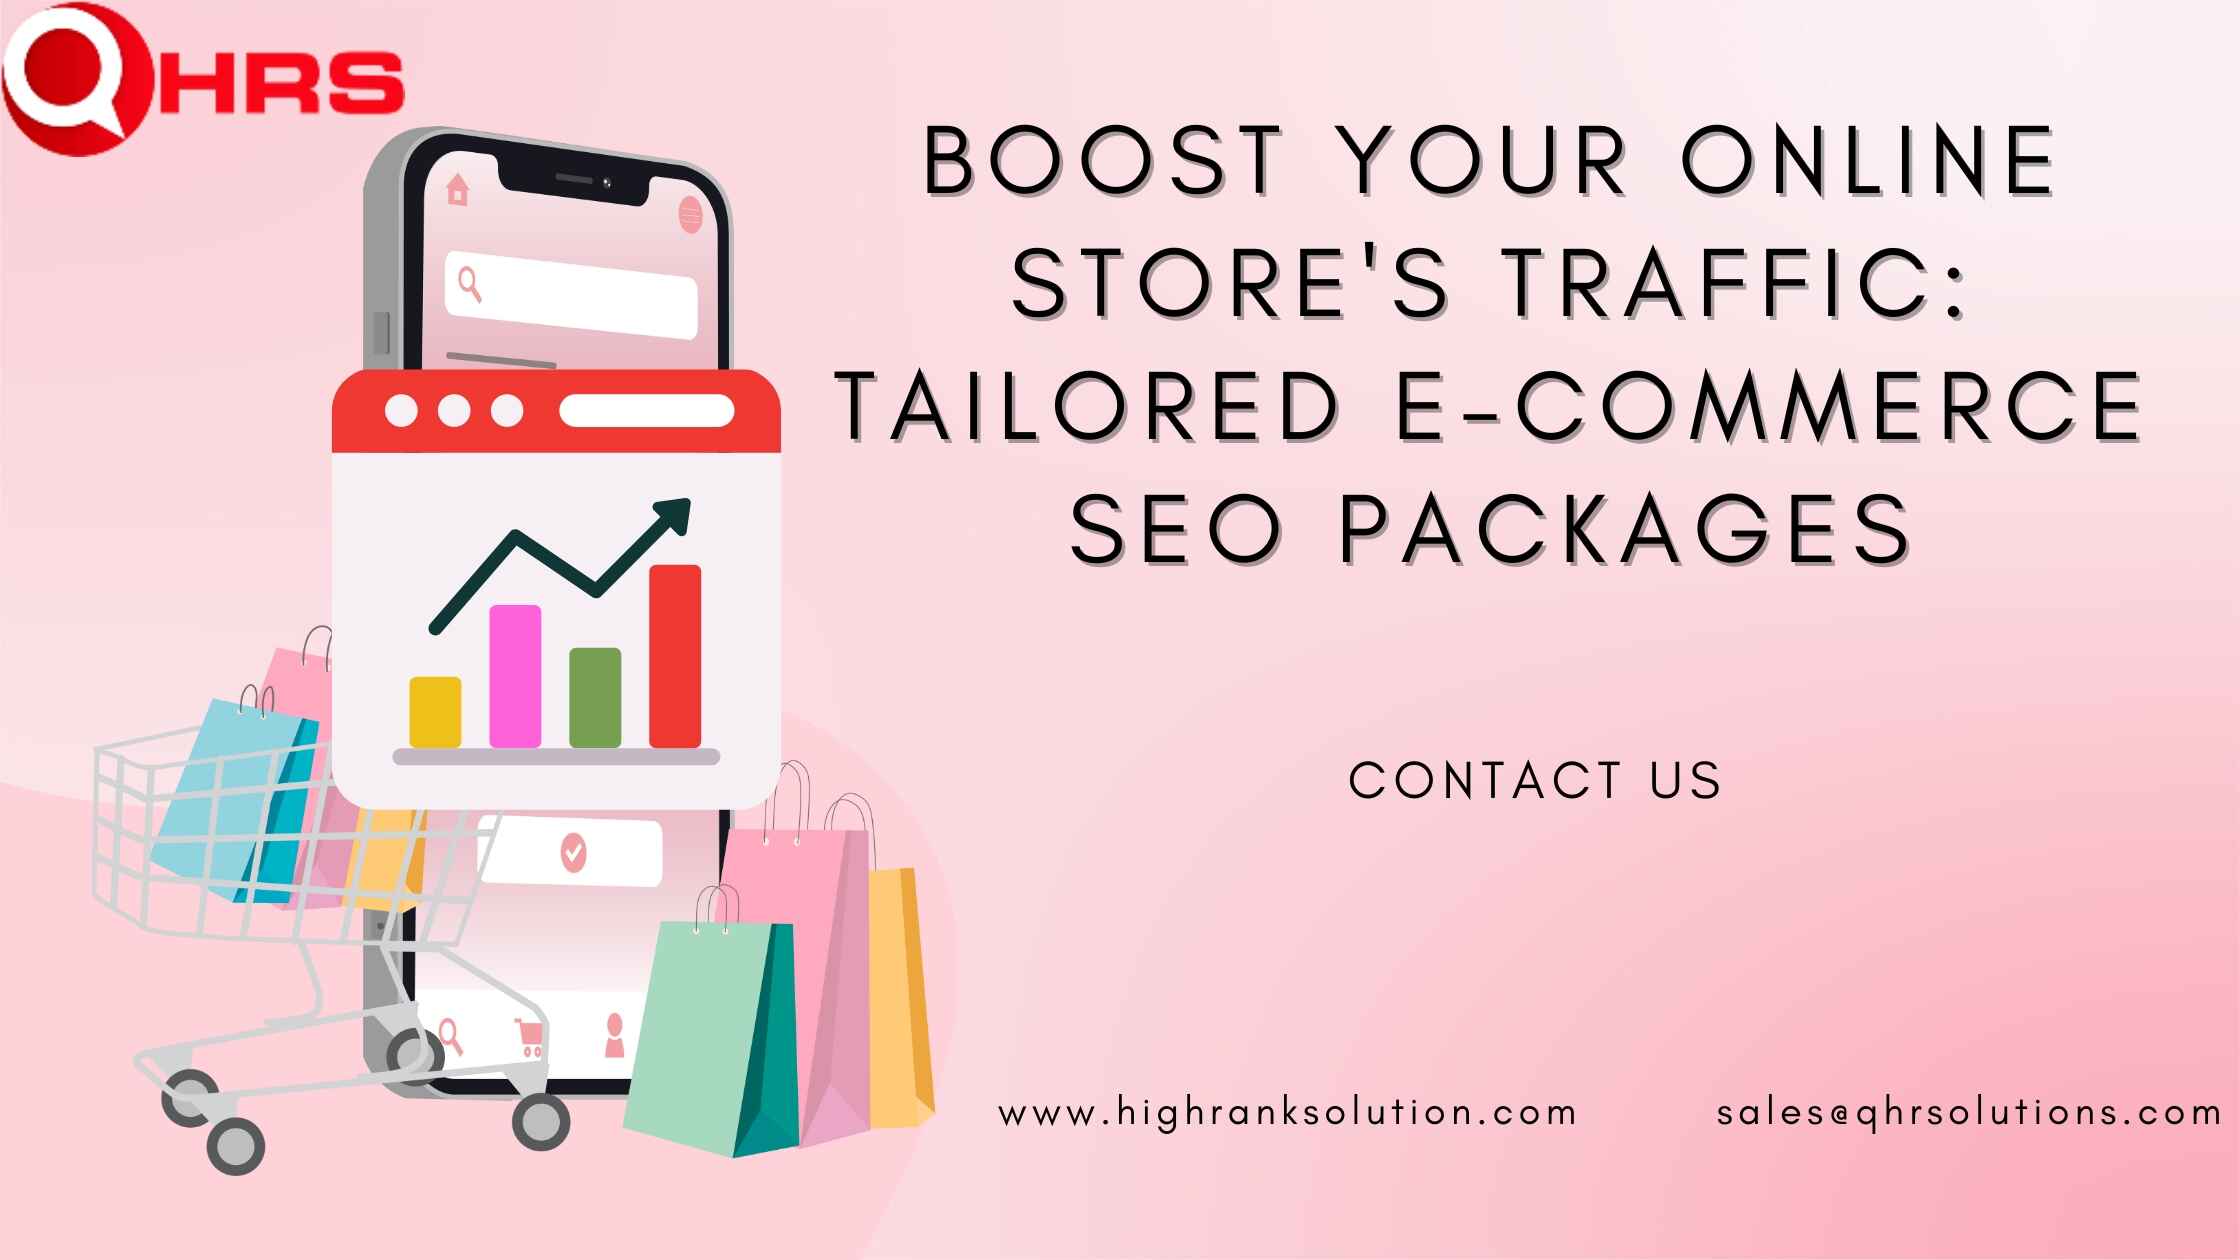 Boost Your Online Store’s Traffic: Tailored E-commerce SEO Packages